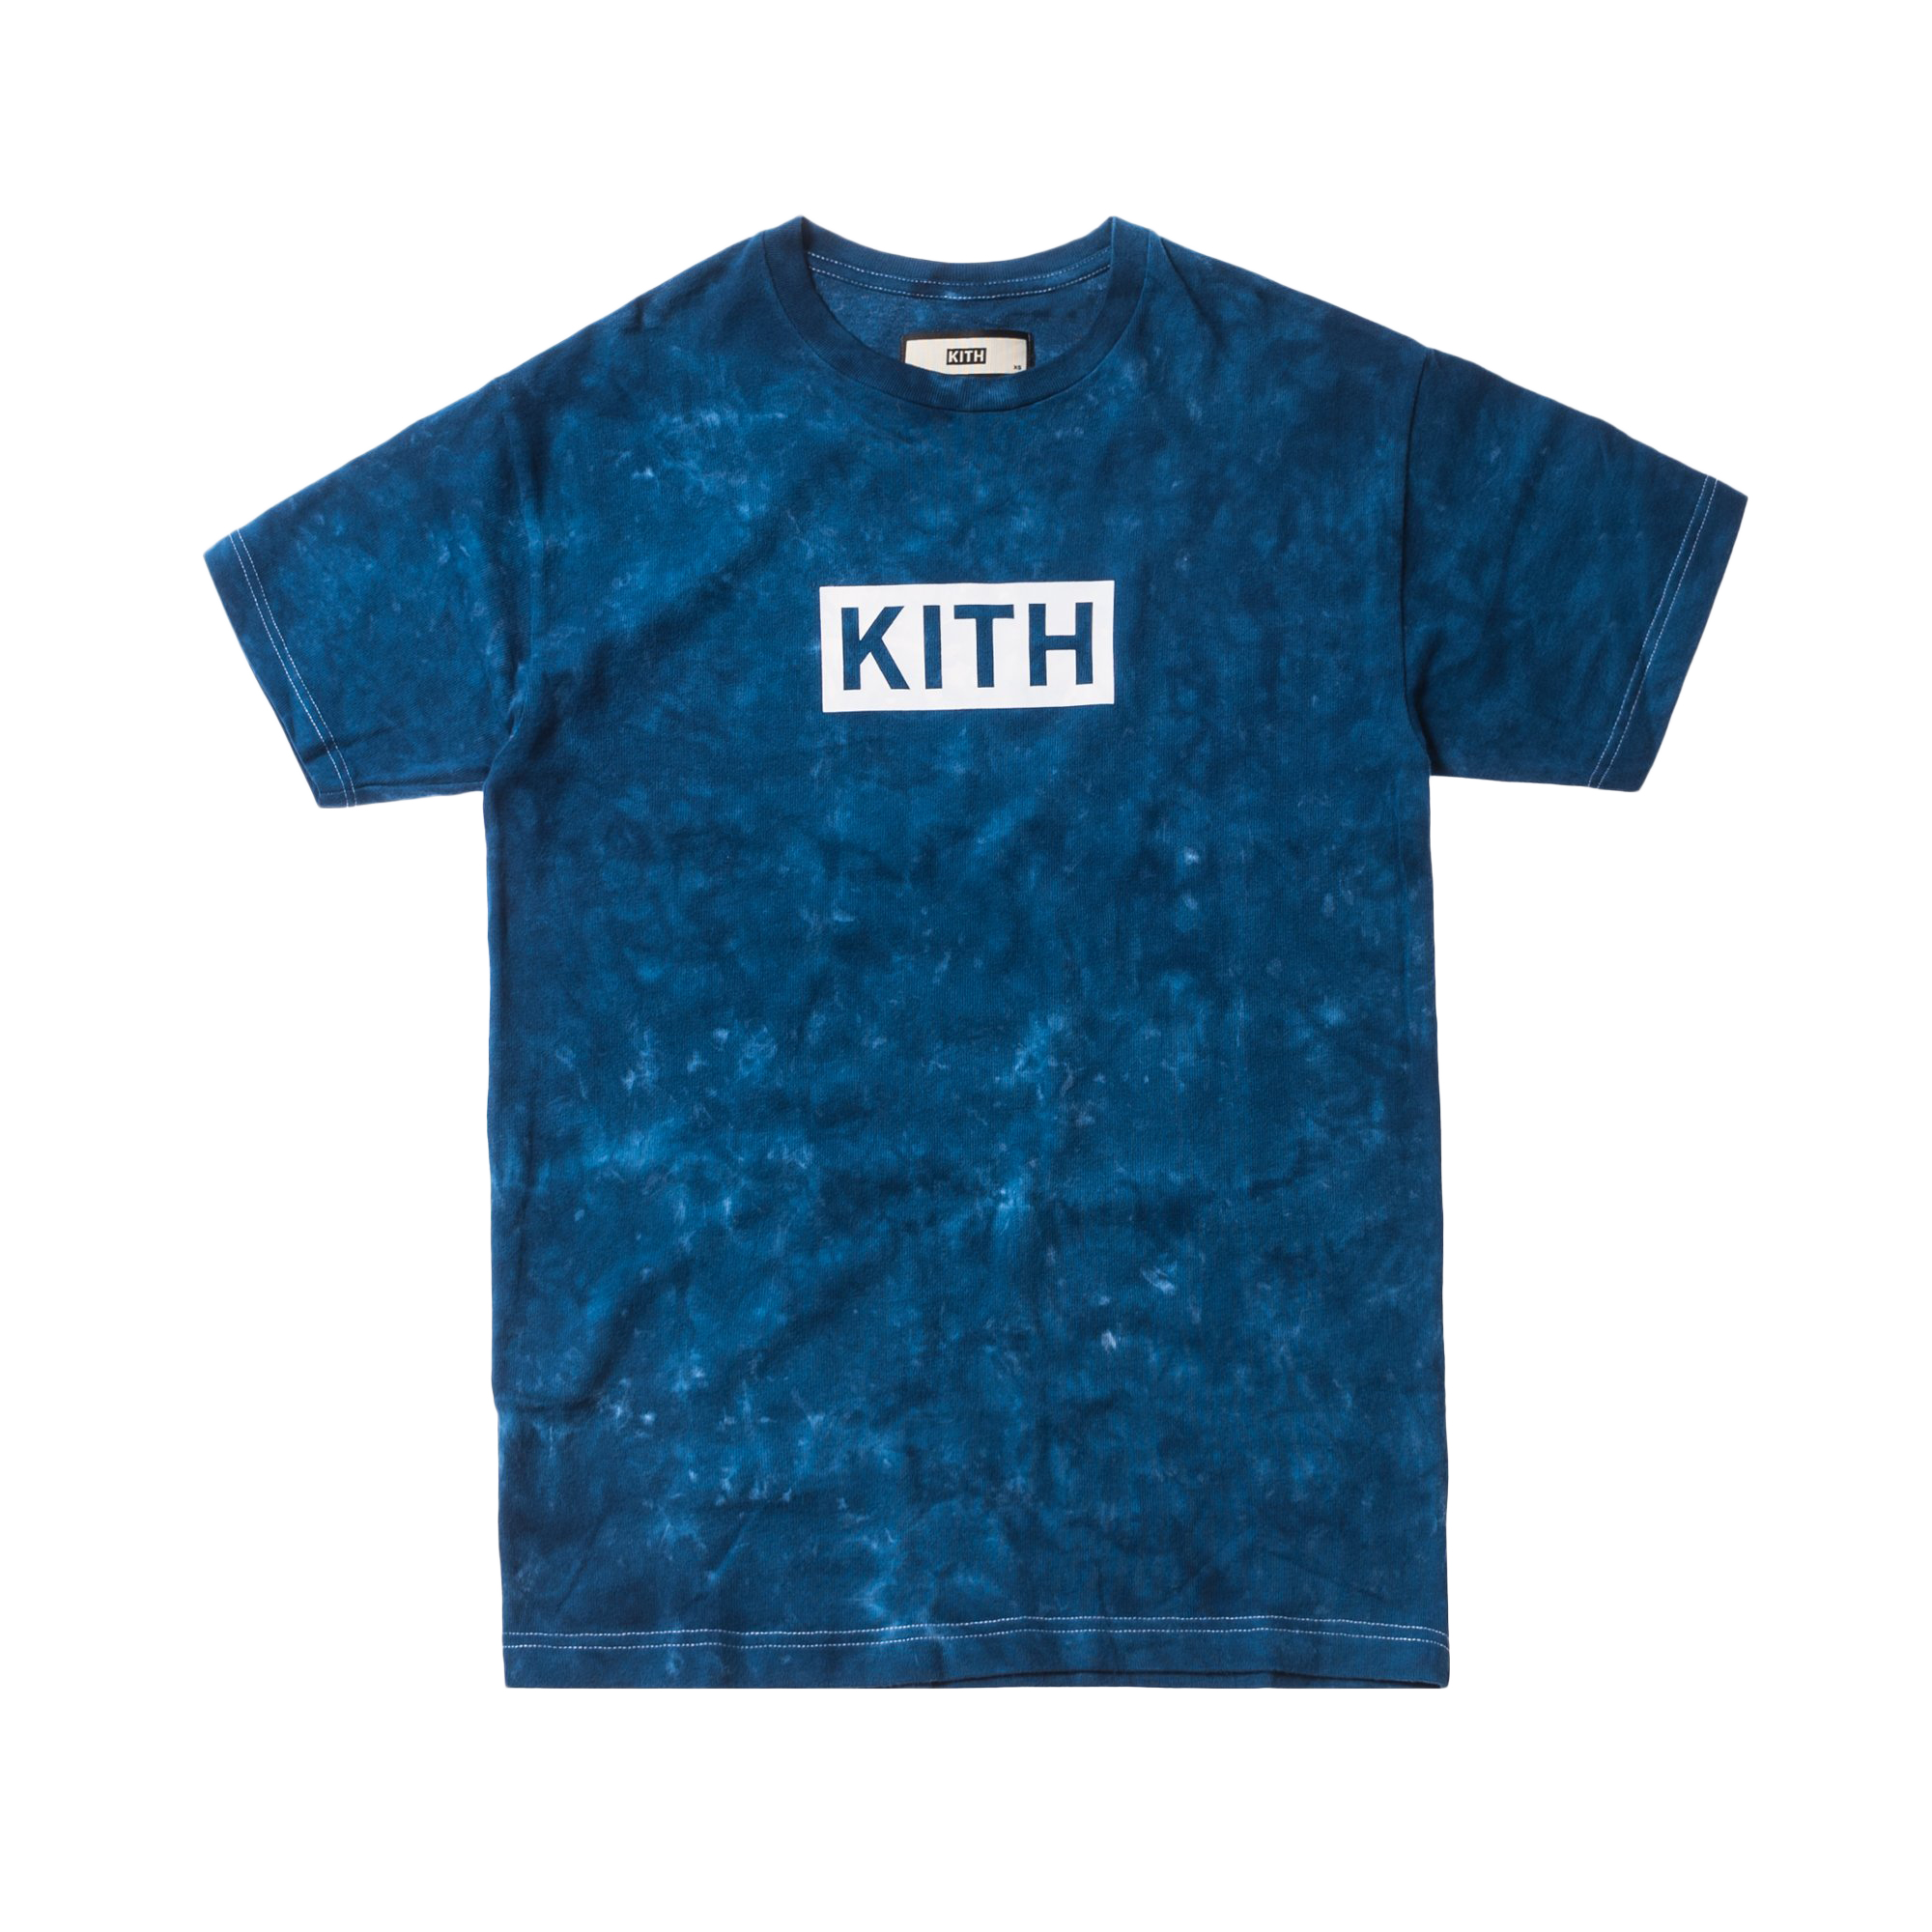 Kith Solid Dye Tee Navy Men's - SS18 - US